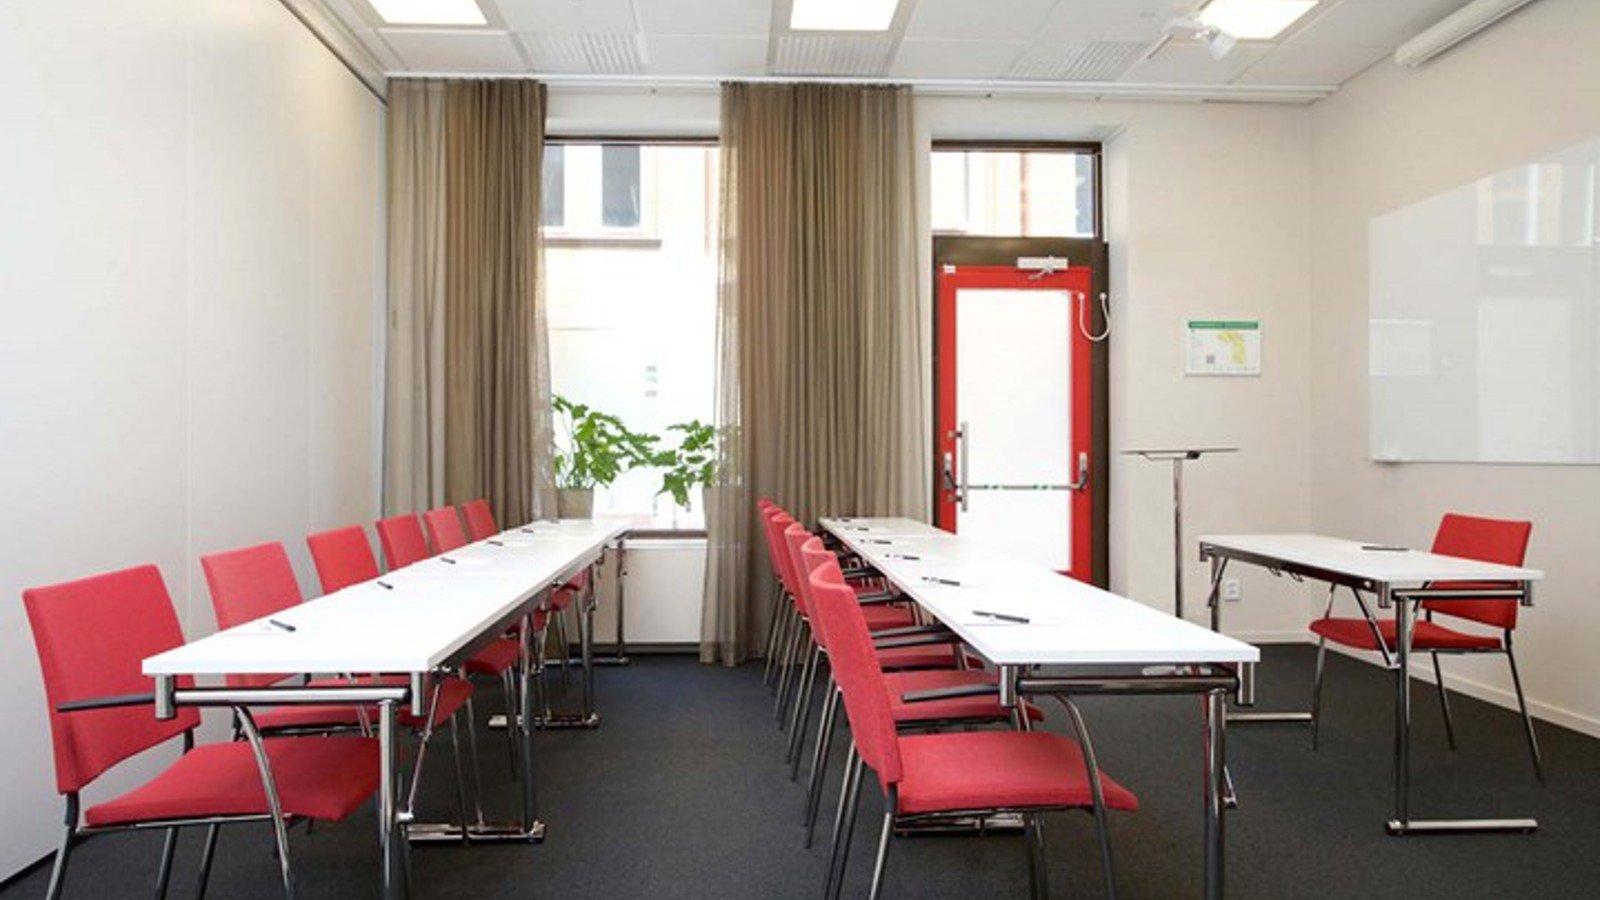 Conference room with lined up chairs, white tables, red chairs and large window